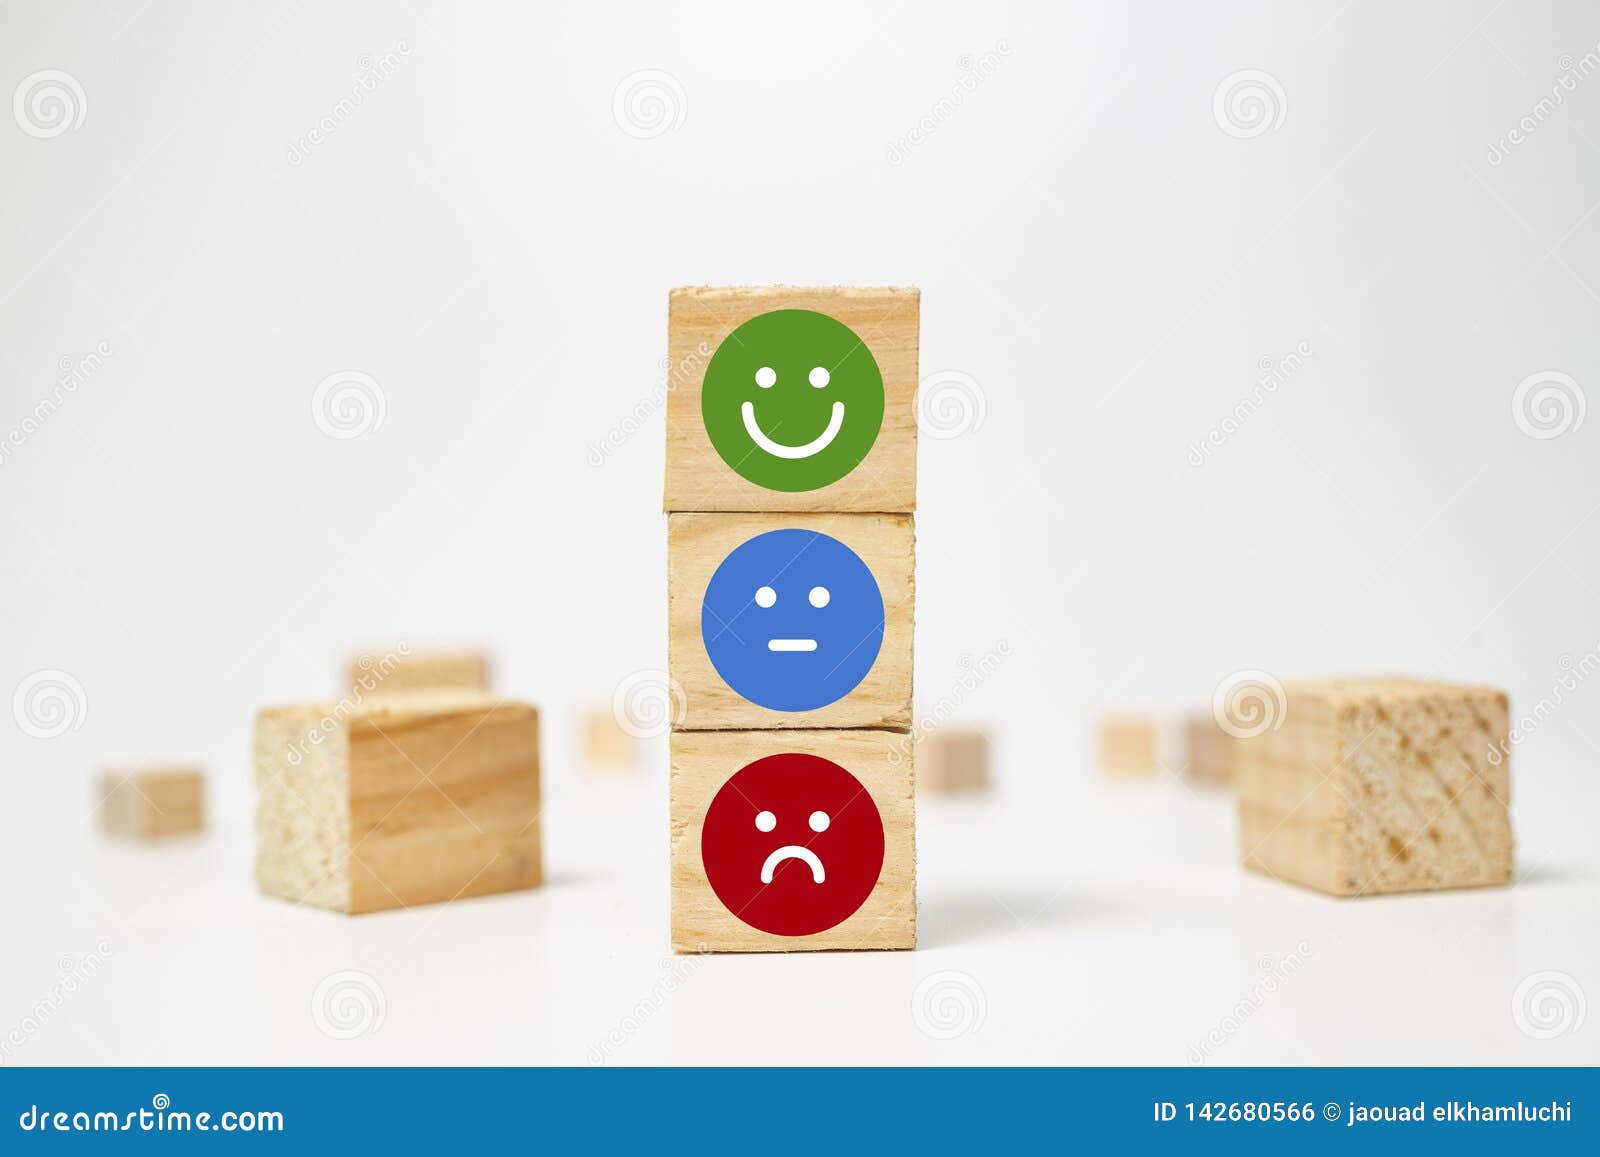 smiley face on wood block cube - business services rating customer experience, satisfaction survey concept - feedback